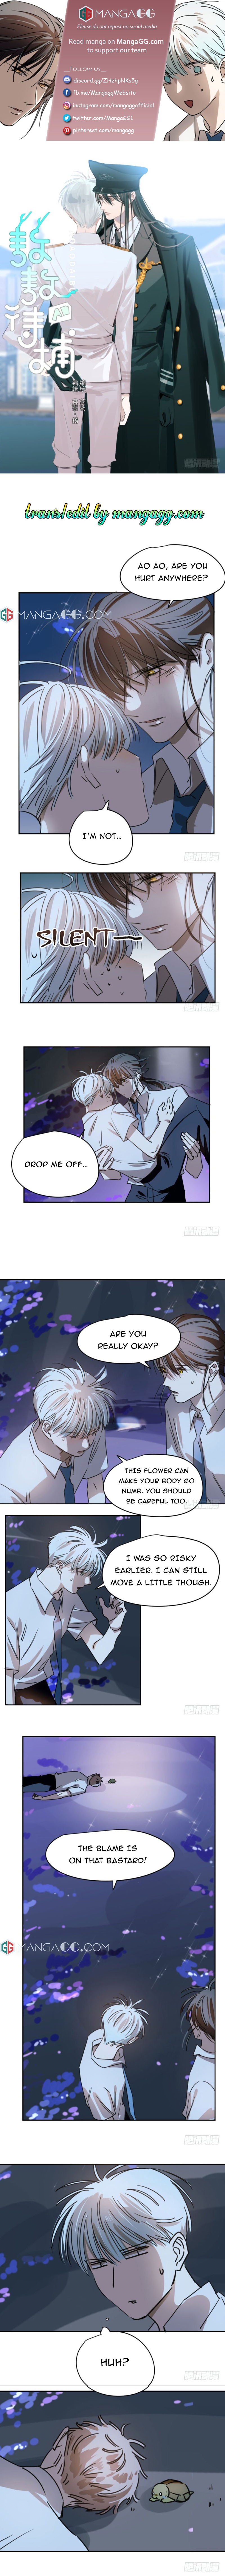 Chasing Ao Ao Chapter 13 - Page 0